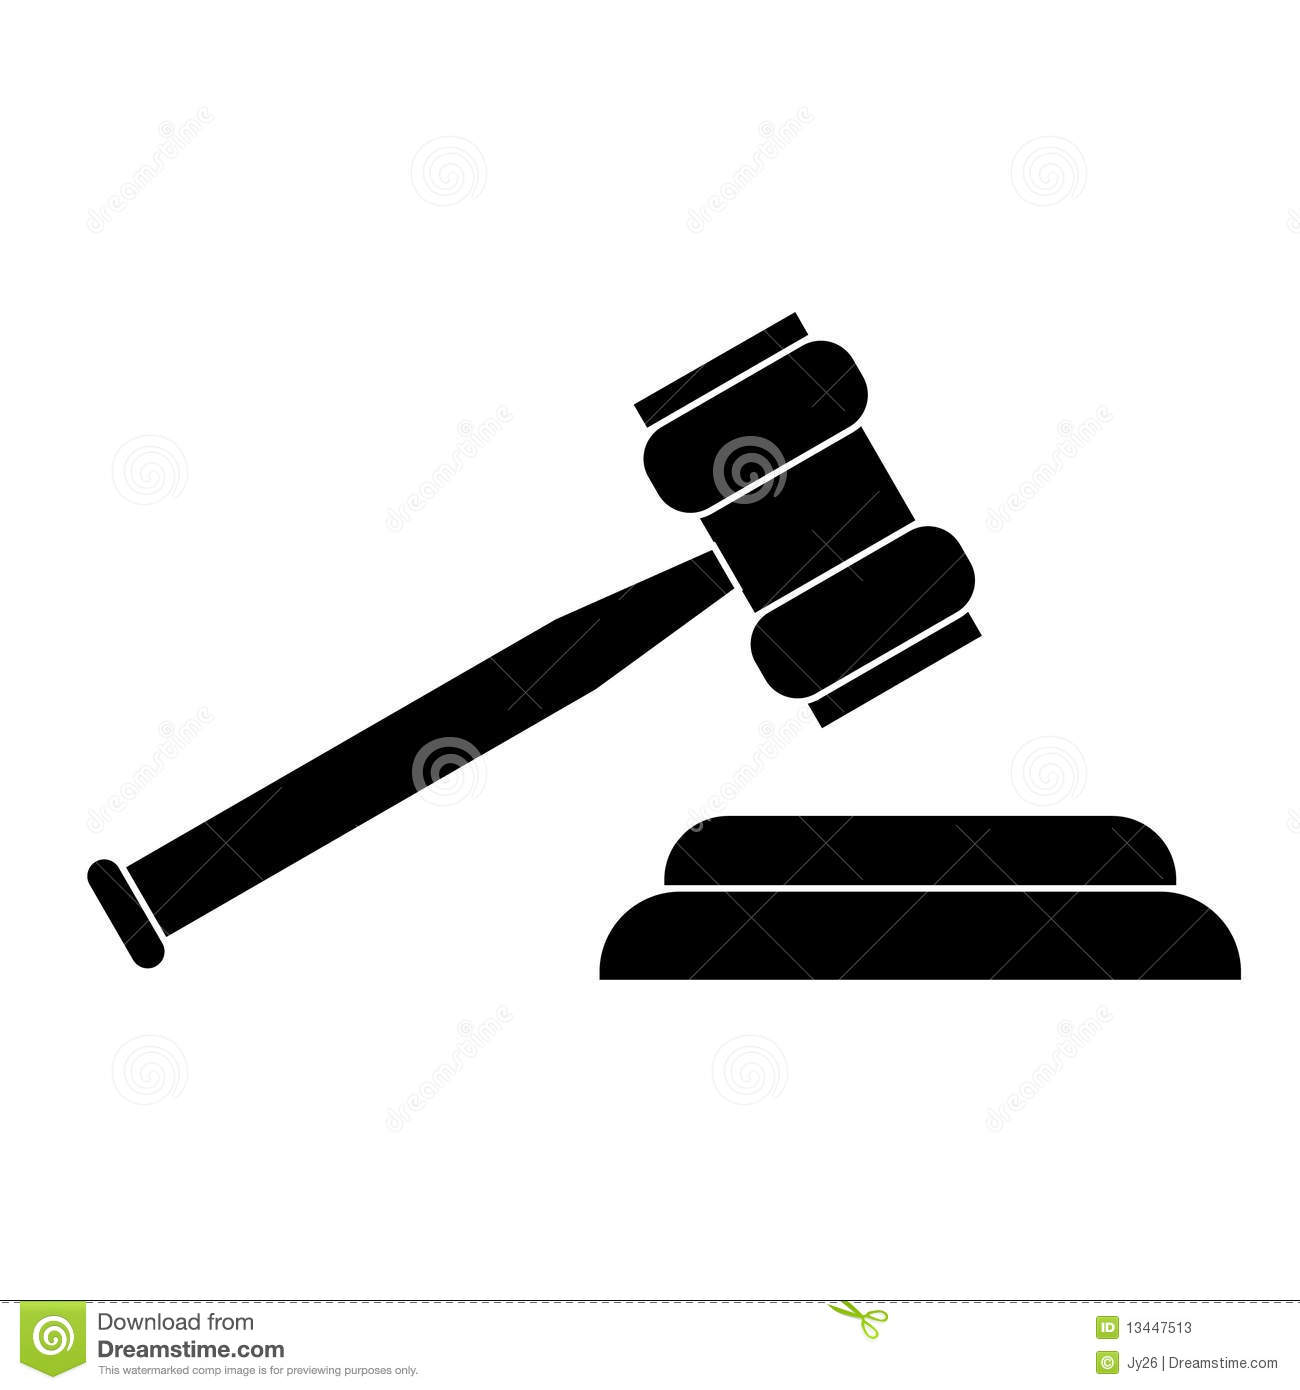 Auction clipart auction gavel. Auctioneer hammer 